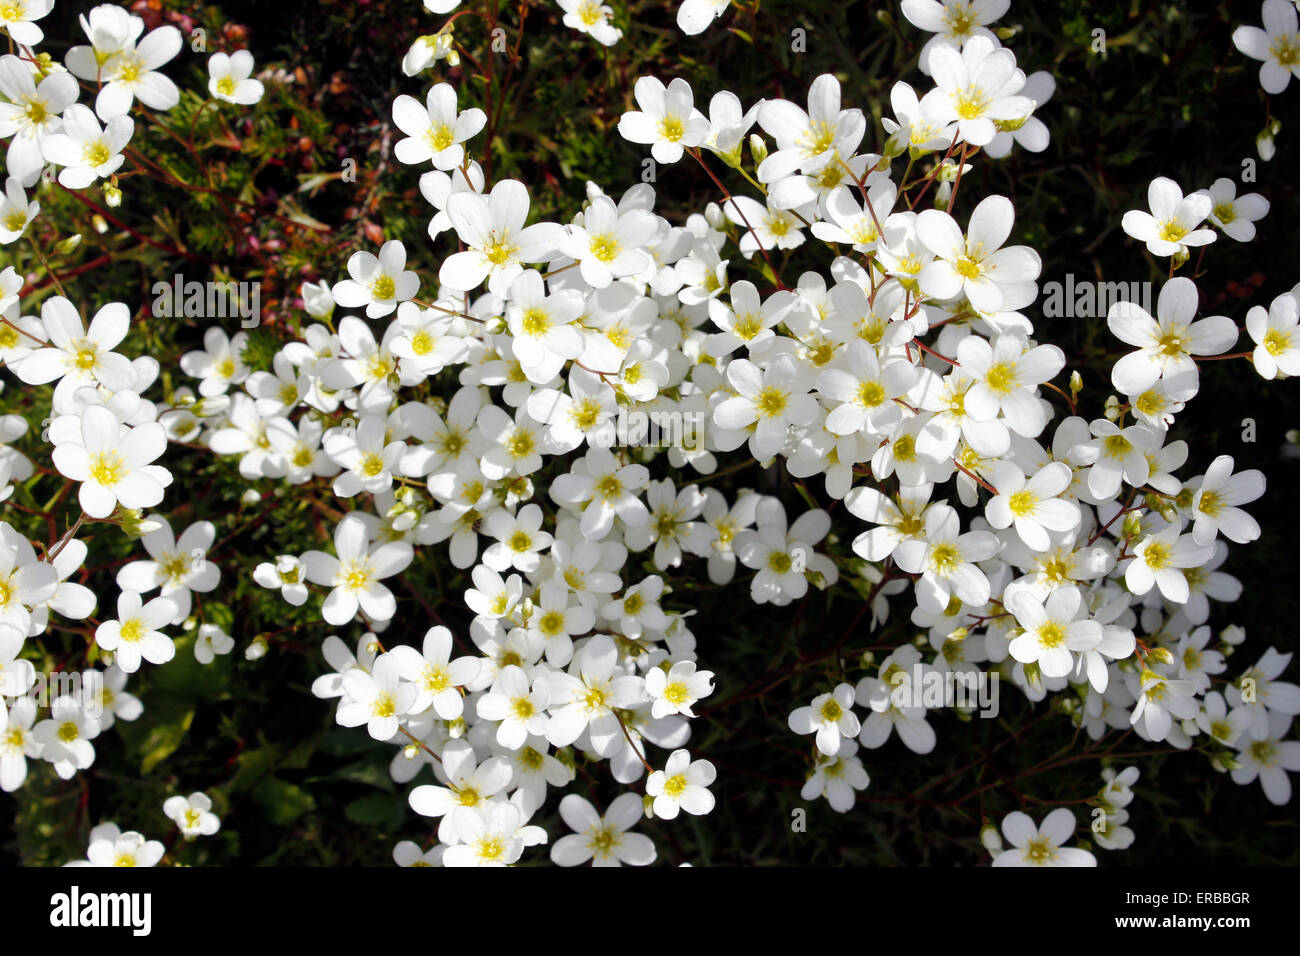 Mossy Saxifrage with masses of white star shape flowers above a cushion of mossy leaves Stock Photo